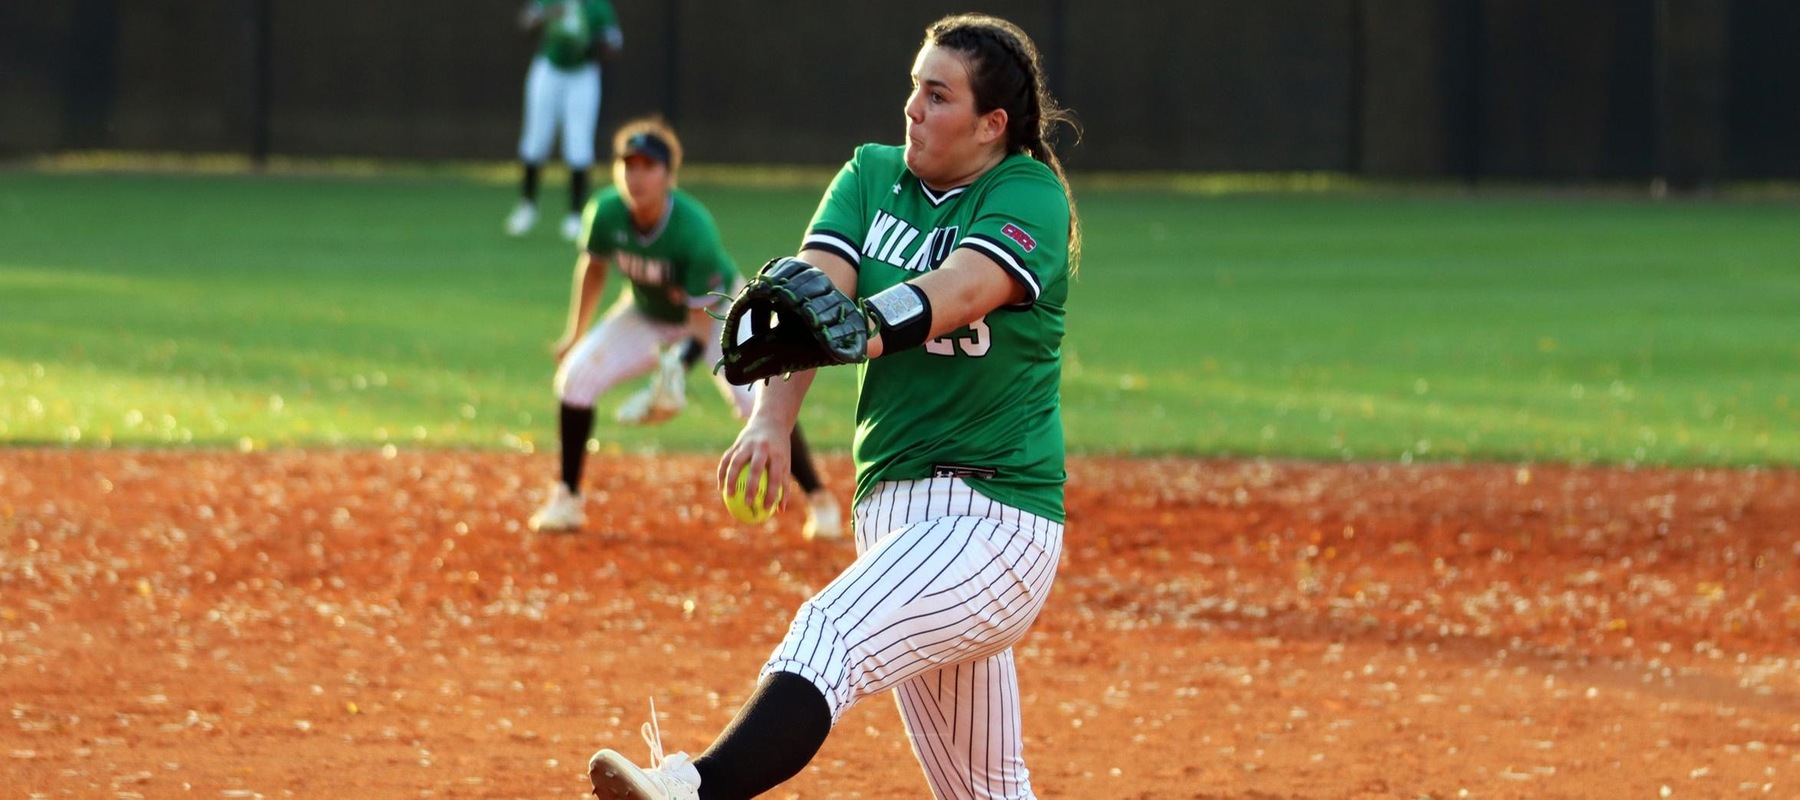 File photo of Molly Dill. Copyright 2020. Wilmington University. All rights reserved. Photo by Mary Kate Rumbaugh. March 3, 2020 vs. Tampa in Tampa, Florida.